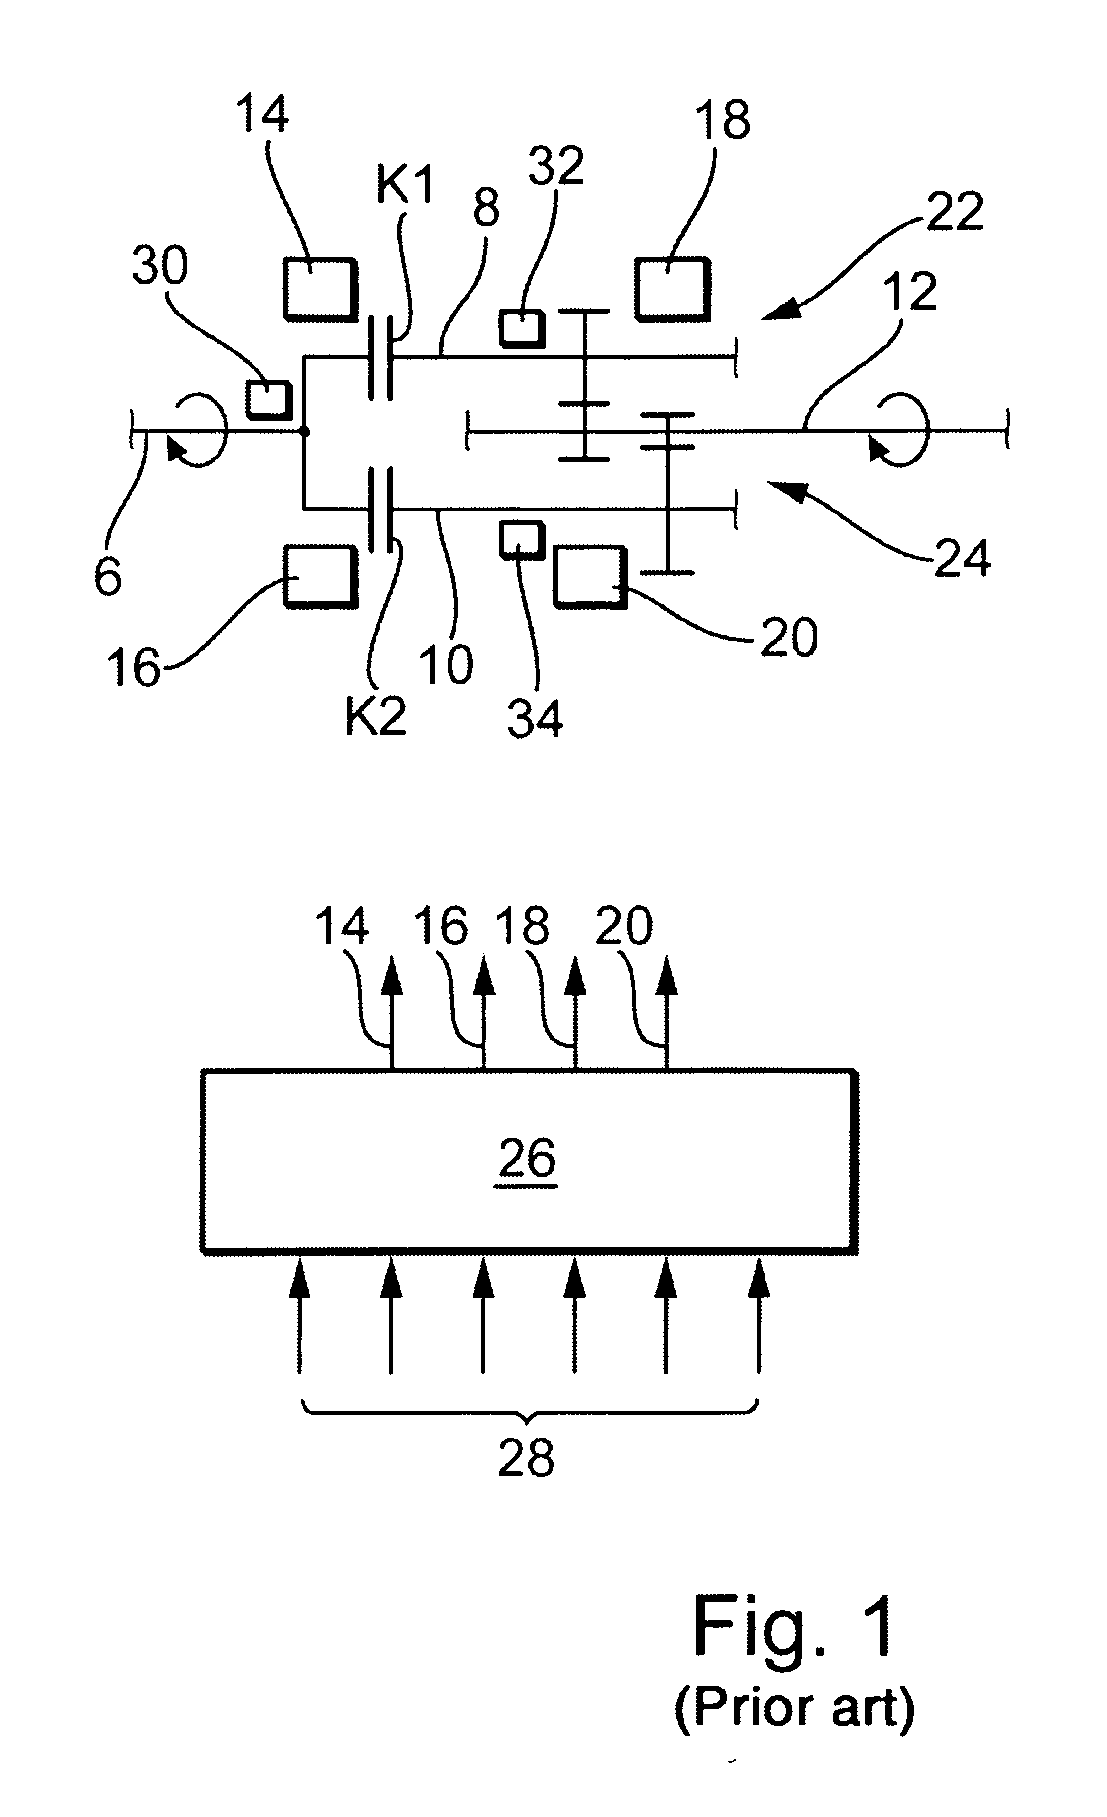 Method for checking the plausibility of the position of the clutch actuator of a clutch, method for determining the touch point of a clutch, and device for carrying out the method